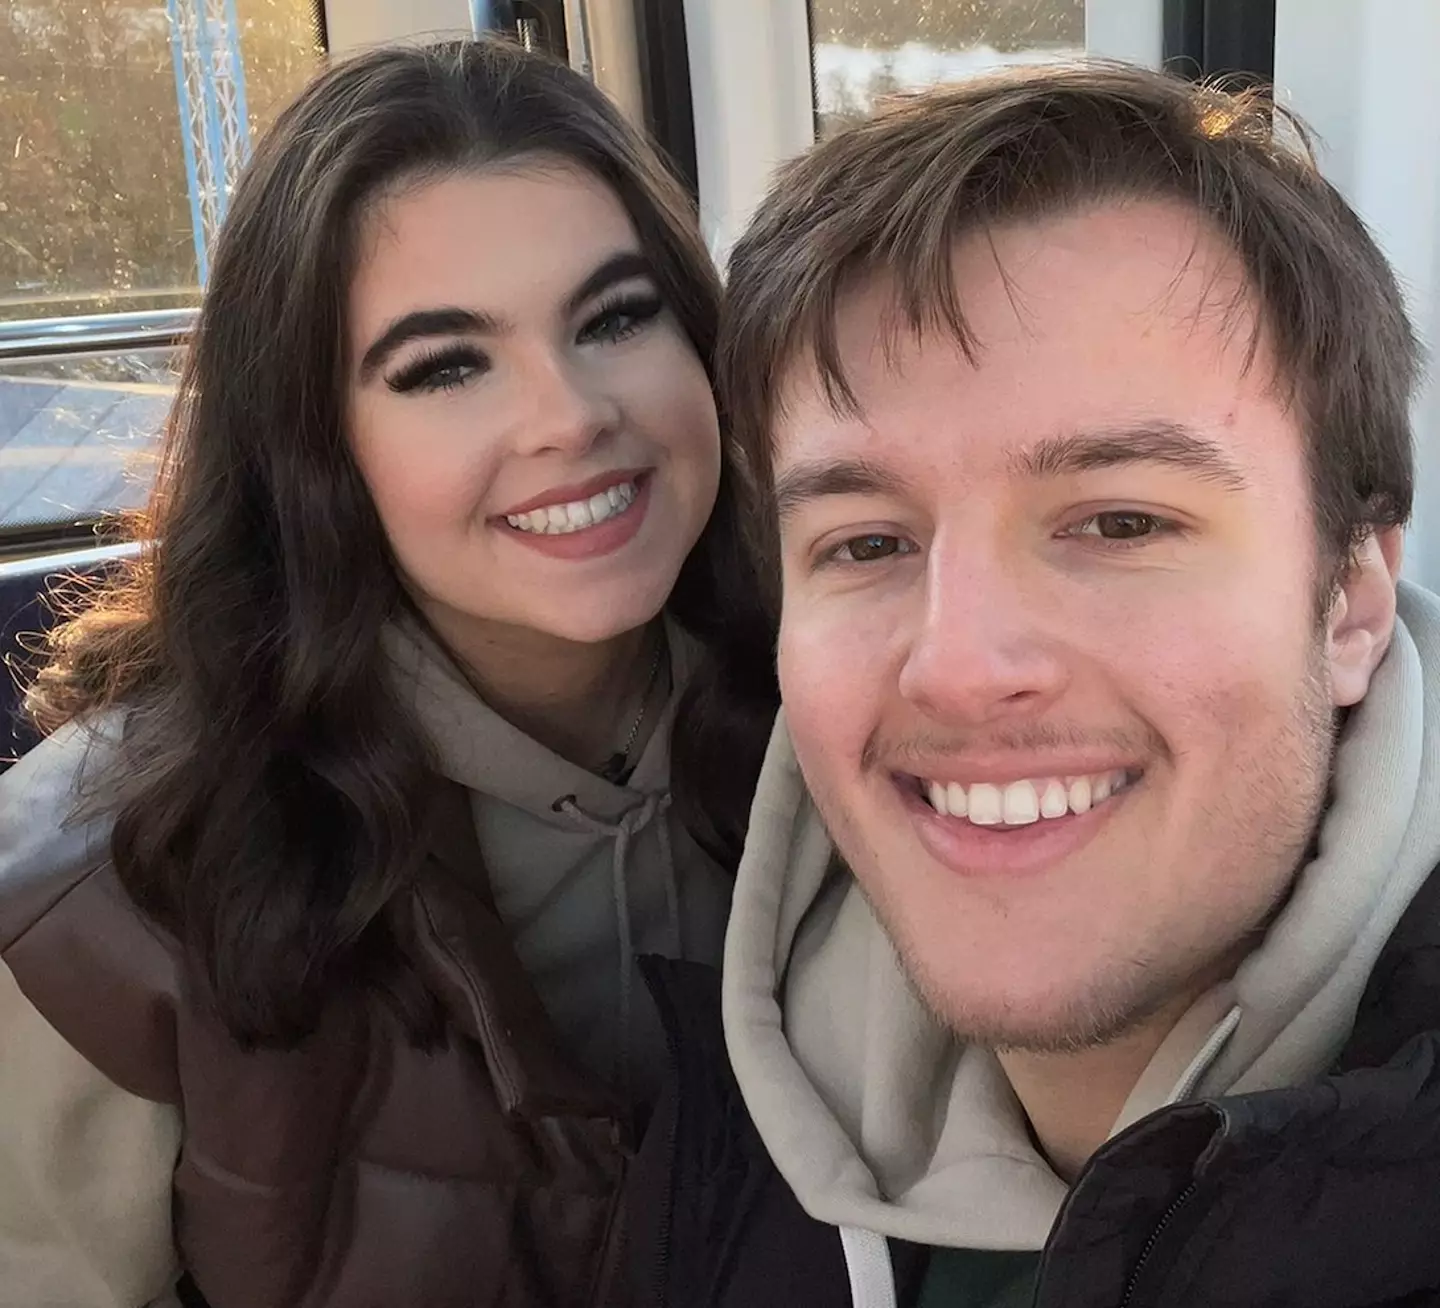 Rhian and Jack are not engaged (